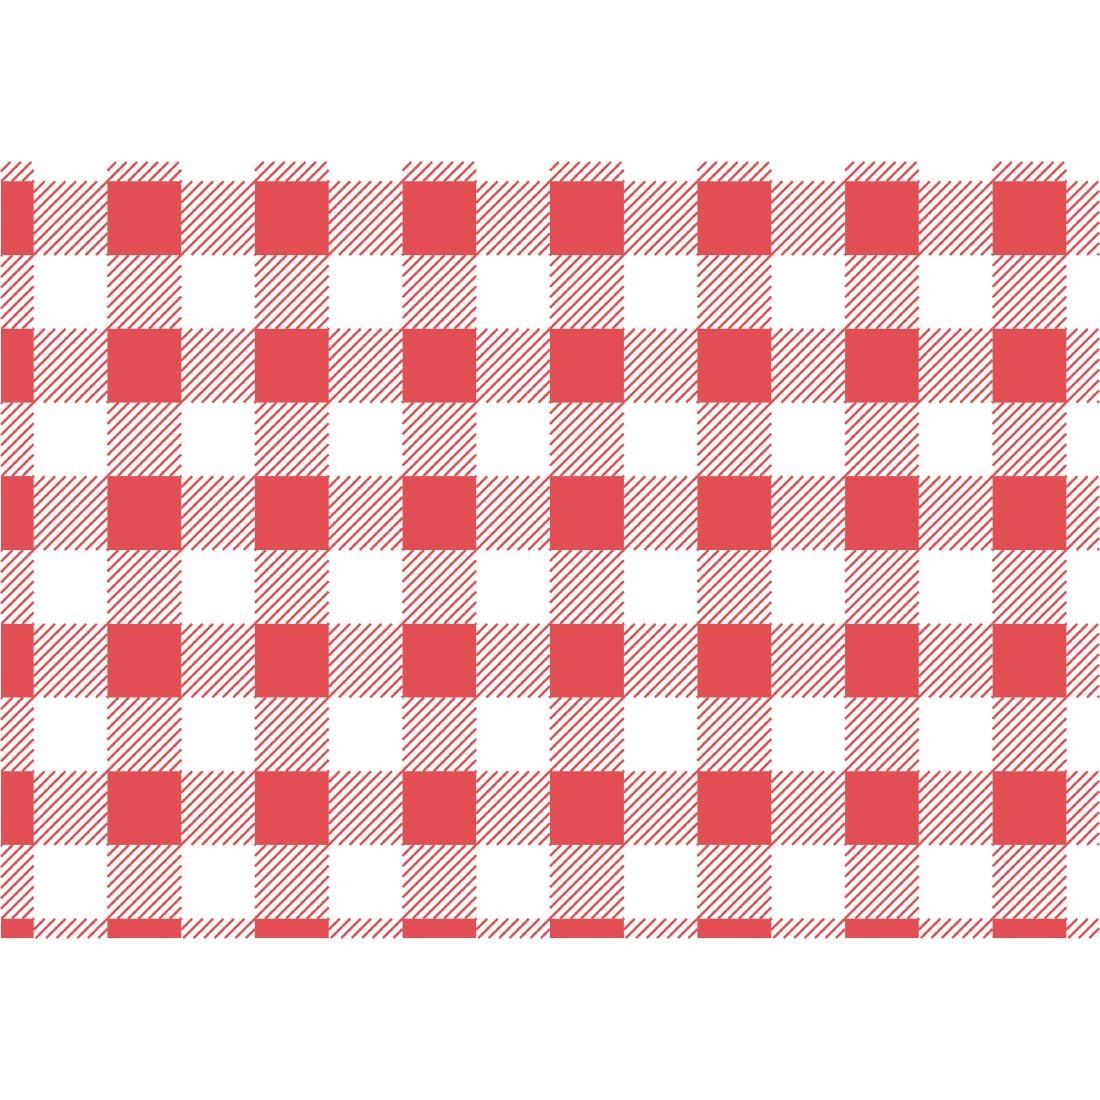 Greaseproof Paper Sheets Red Gingham 250 x 250mm (Pack of 200) - CL657  - 1